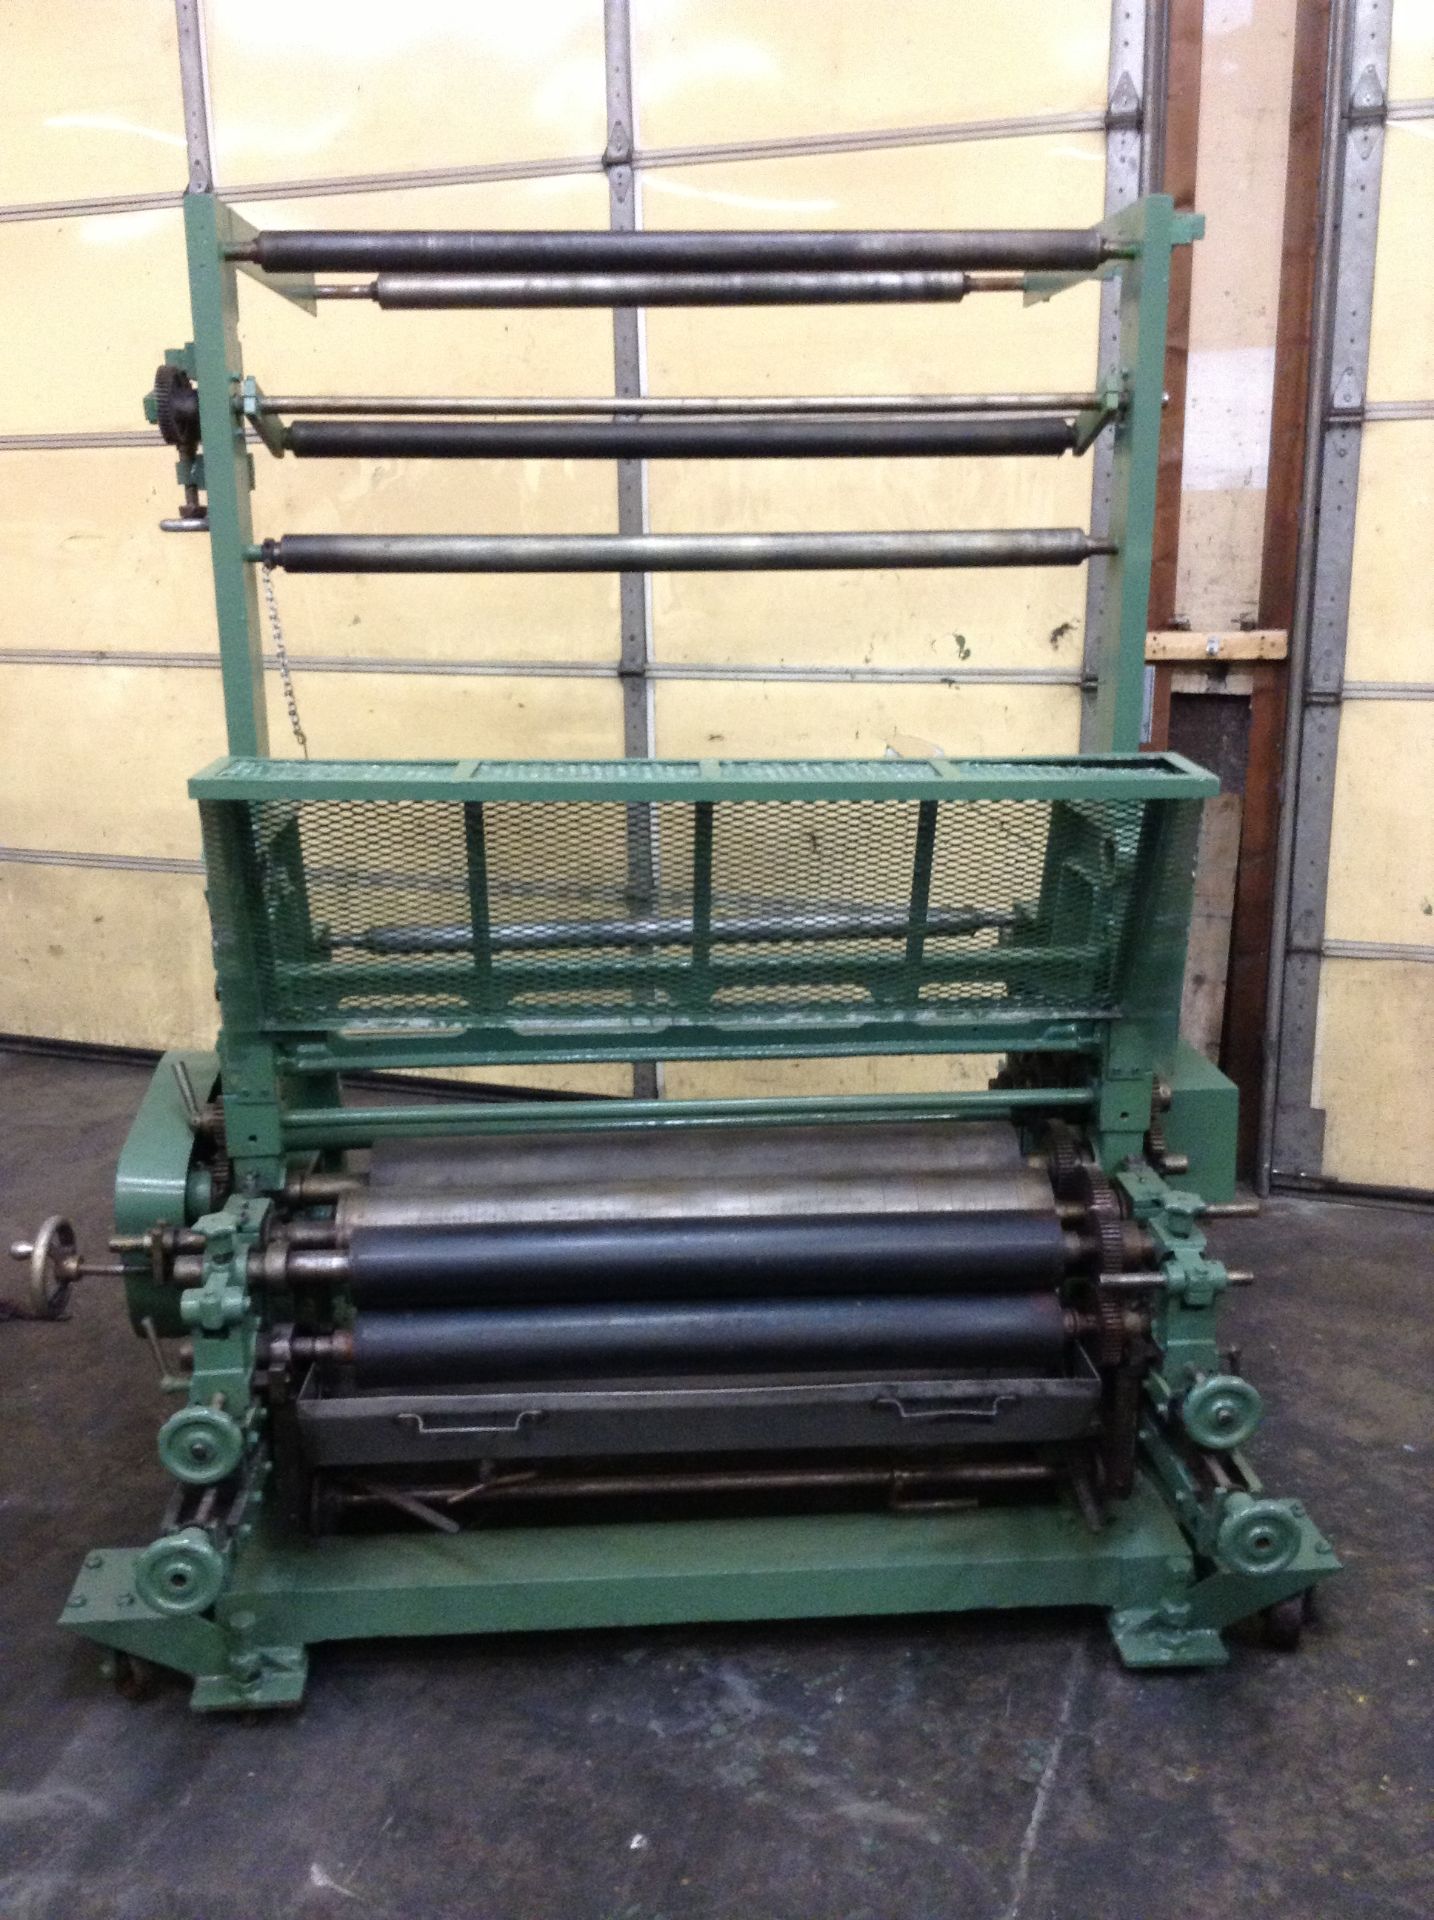 38” Windmoeller & Hoelscher 1-color flexographic inline printing press. Approx. 10” to 30” repeat.